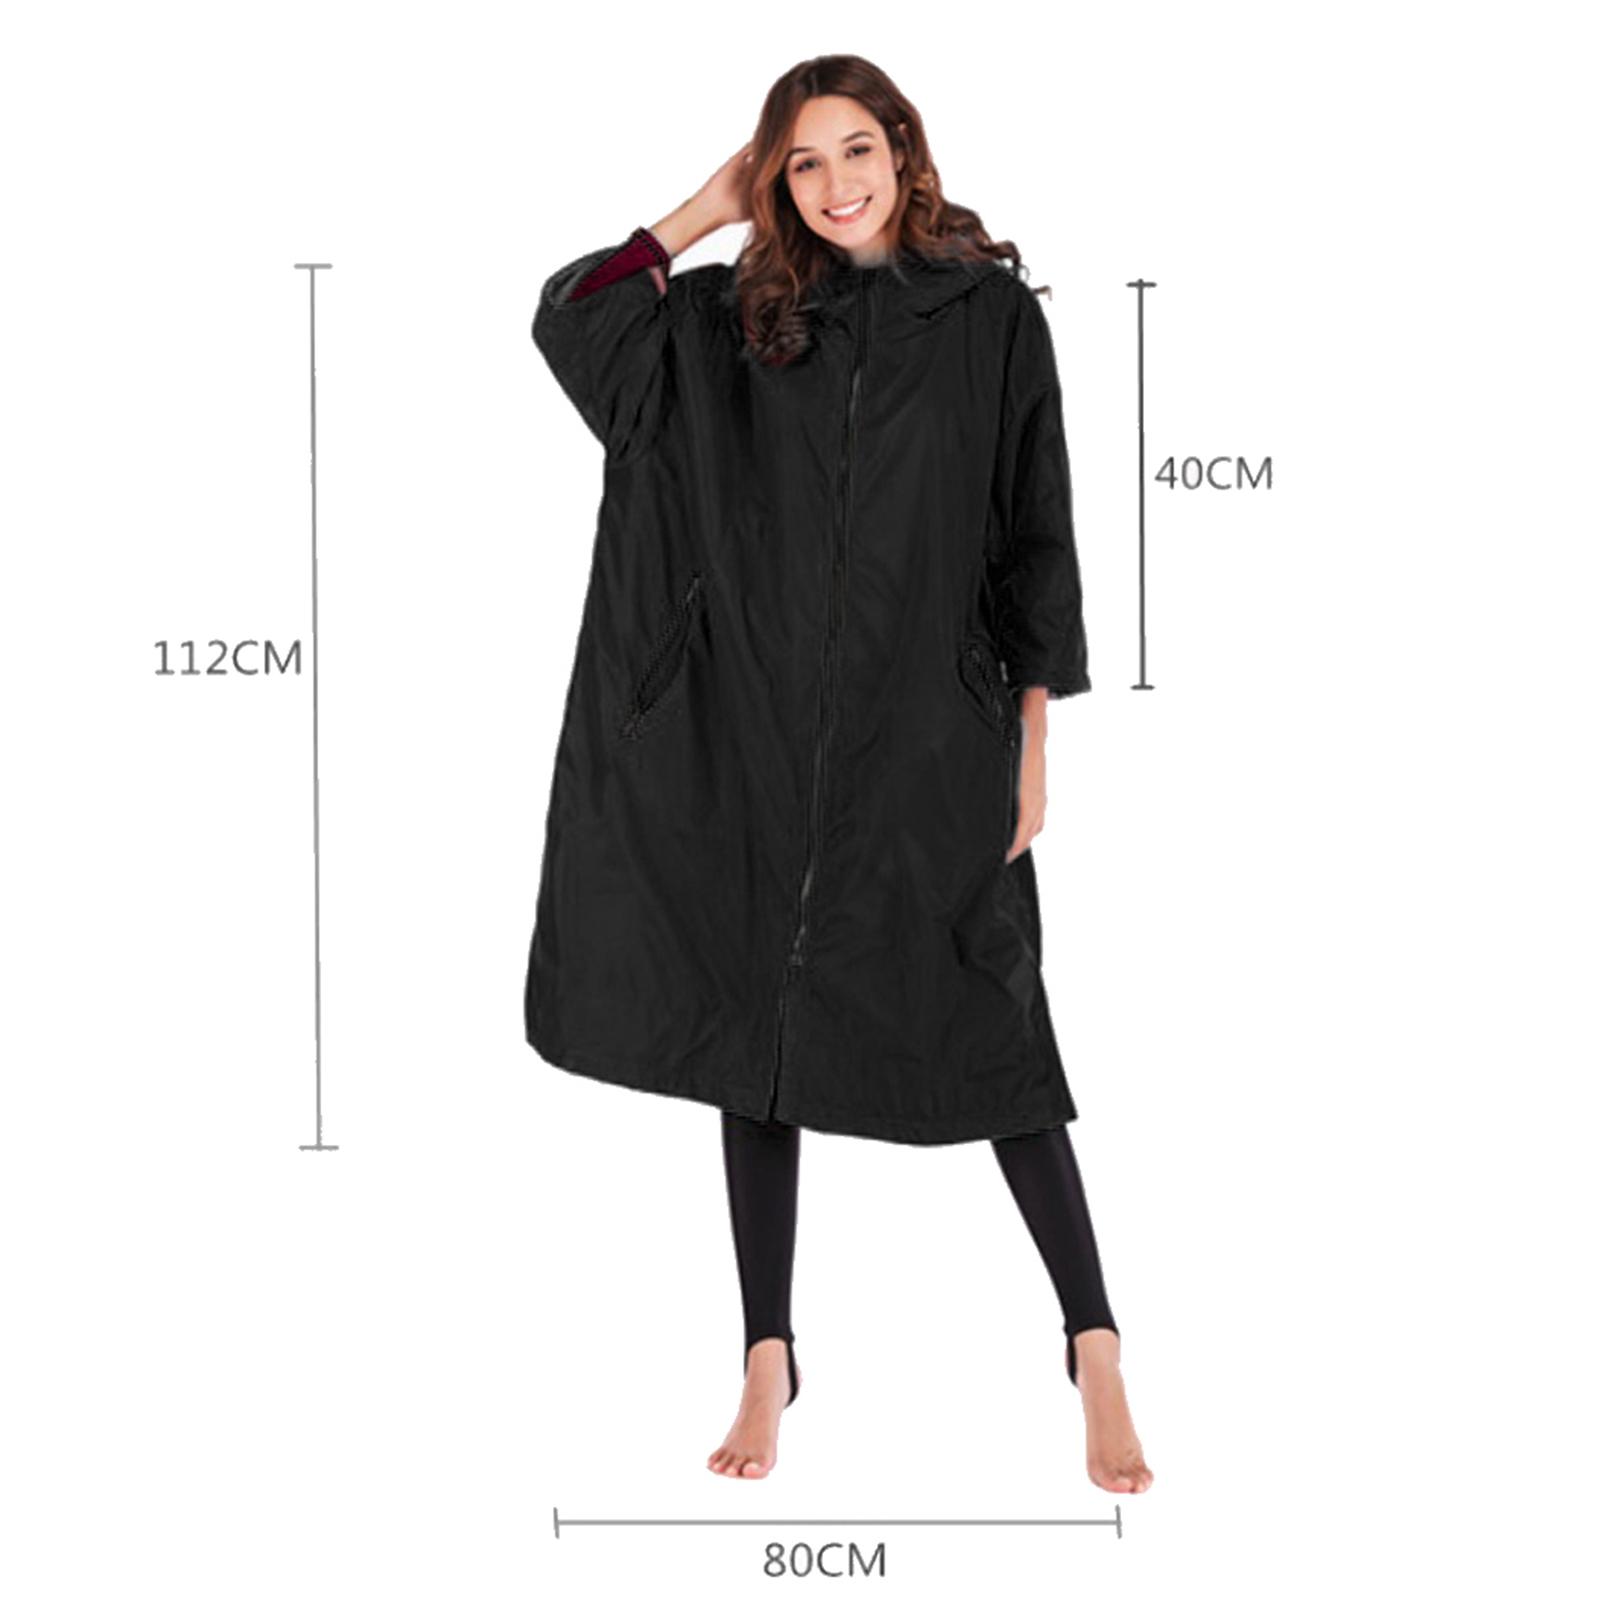 Thermal ed Windbreaker Long Fleece Lining Jacket Anorak Rain Coat Outdoor Water Sports Beach Swimming Changing Robe Poncho with , Inner Pocket - Black - image 4 of 9